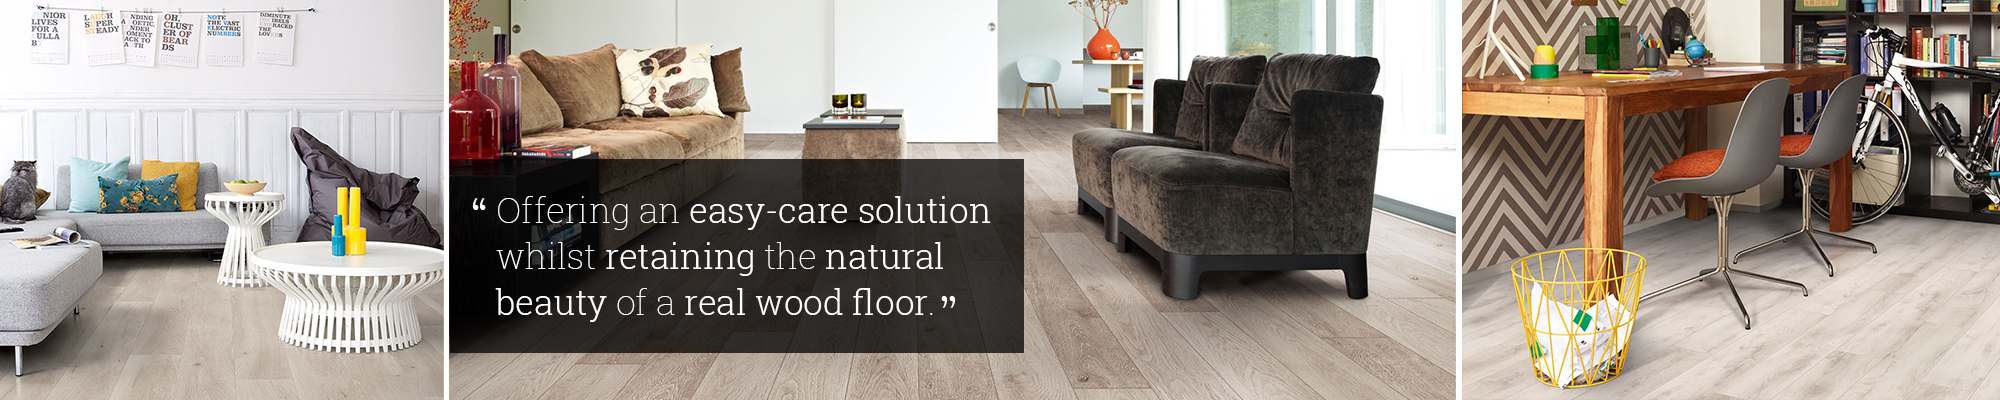 Commercial Laminate Flooring Exeter